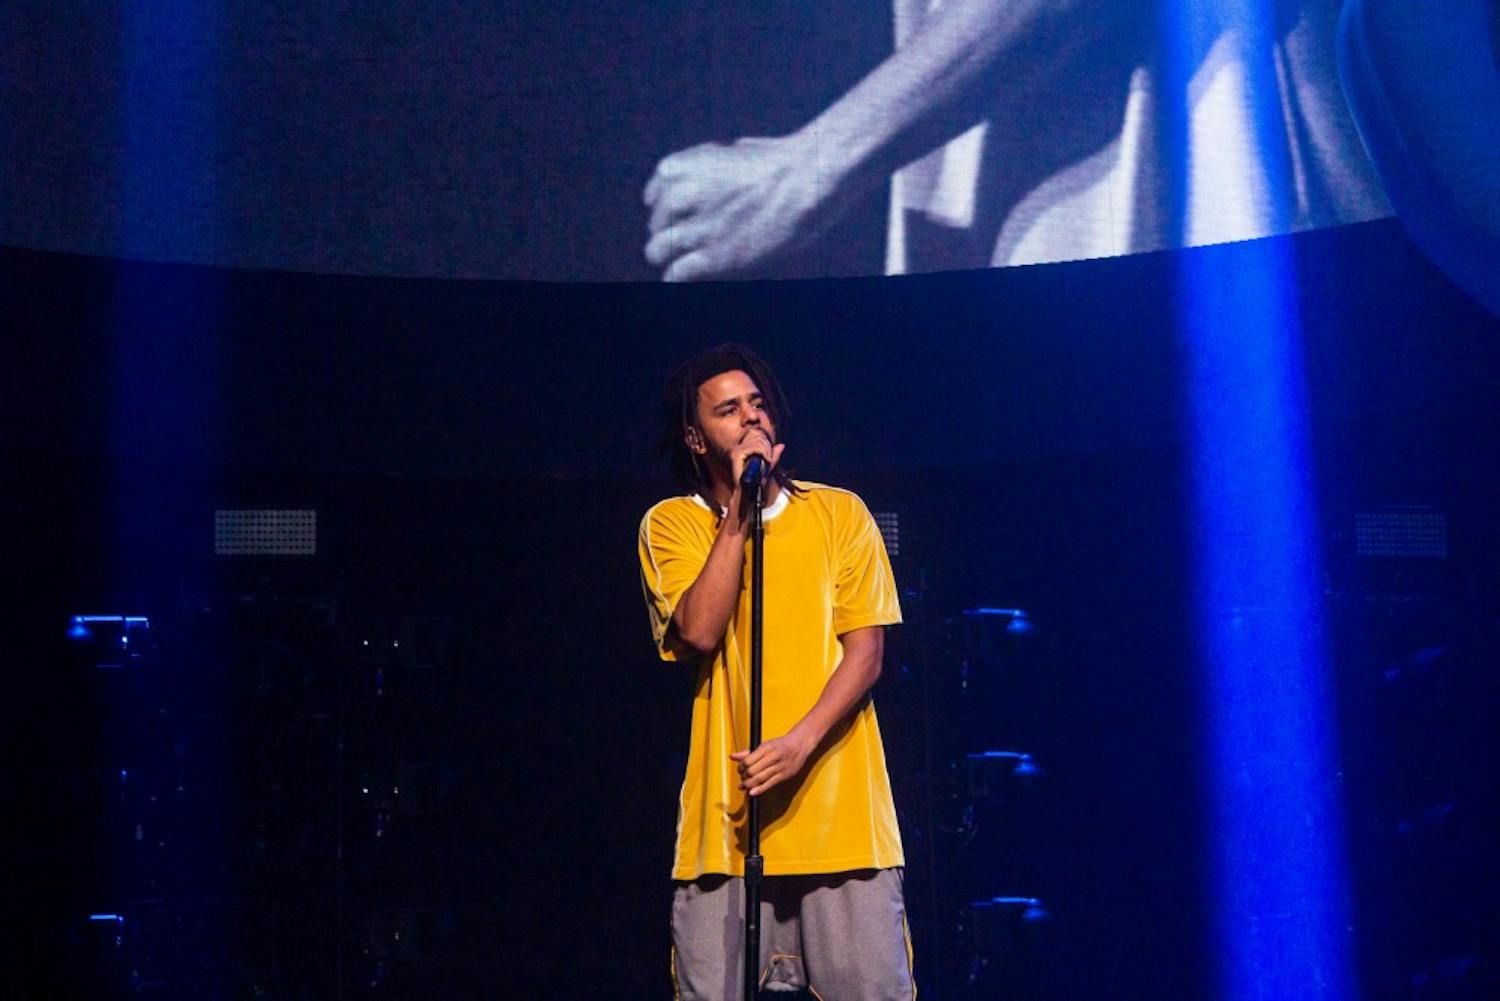 J. Cole brought his “KOD” Tour to the KeyBank Center on Tuesday night, mixing old cuts with the majority of tracks from his latest album. Cole spoke often to the audience, giving context to songs and sharing personal anecdotes.